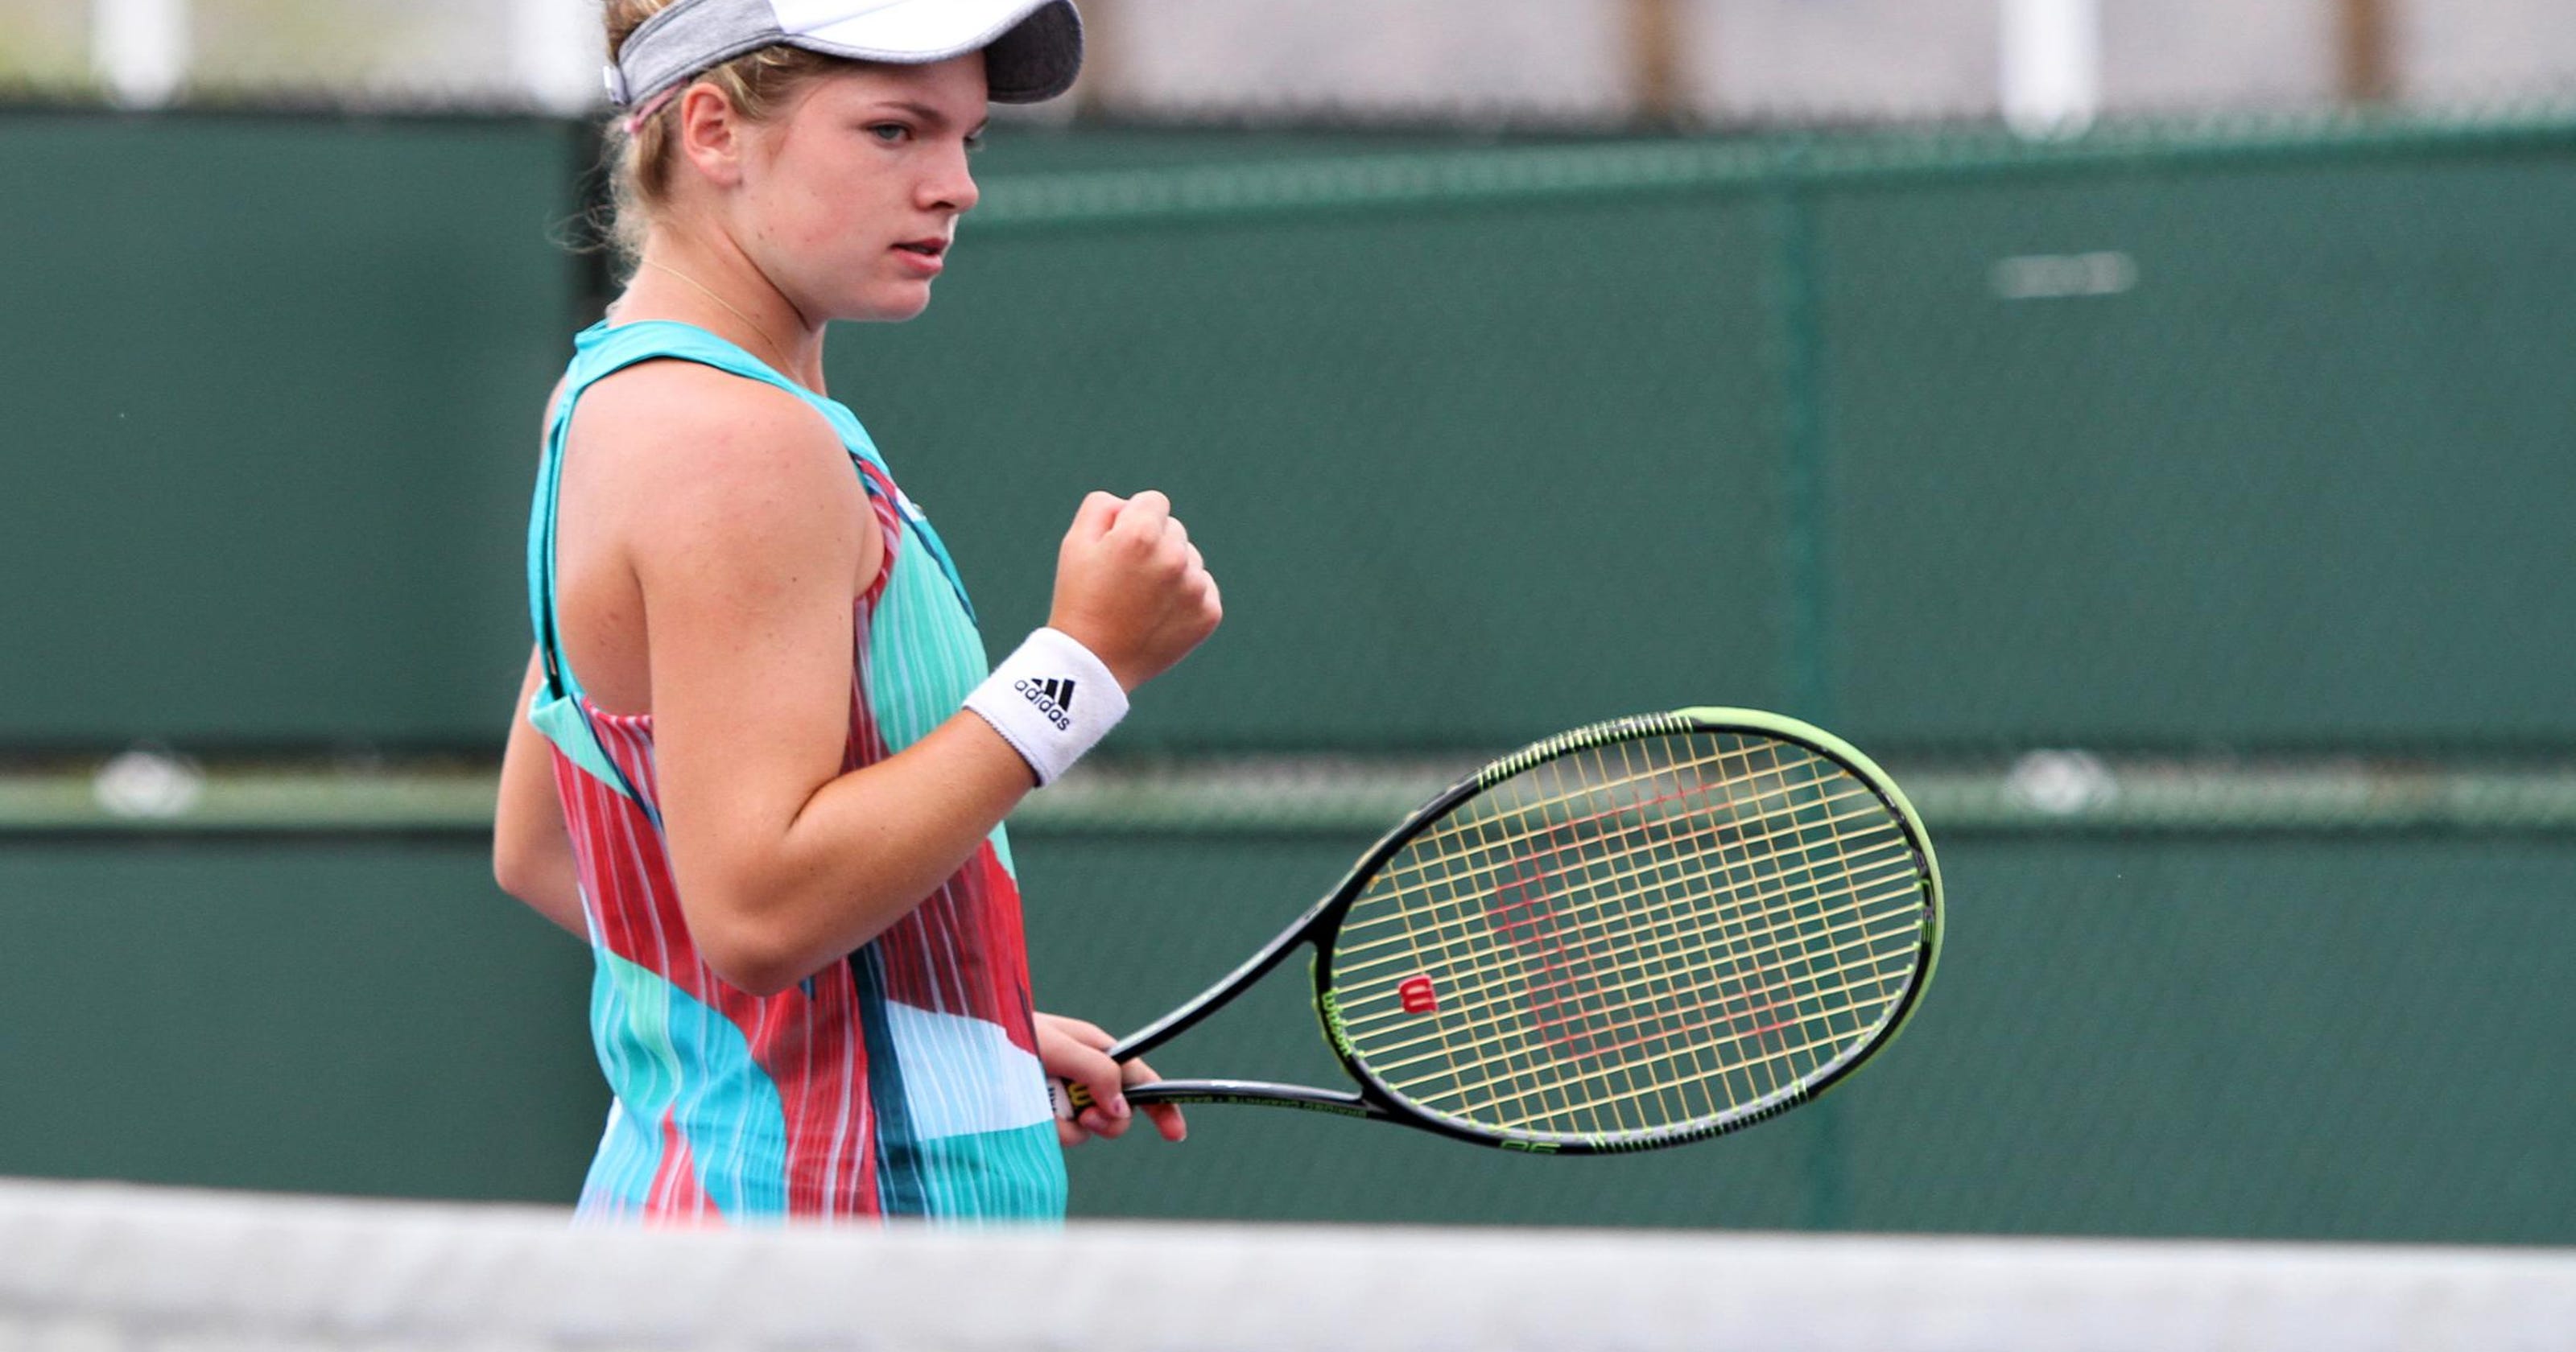 Madeira's McNally advances to French Open Junior finals